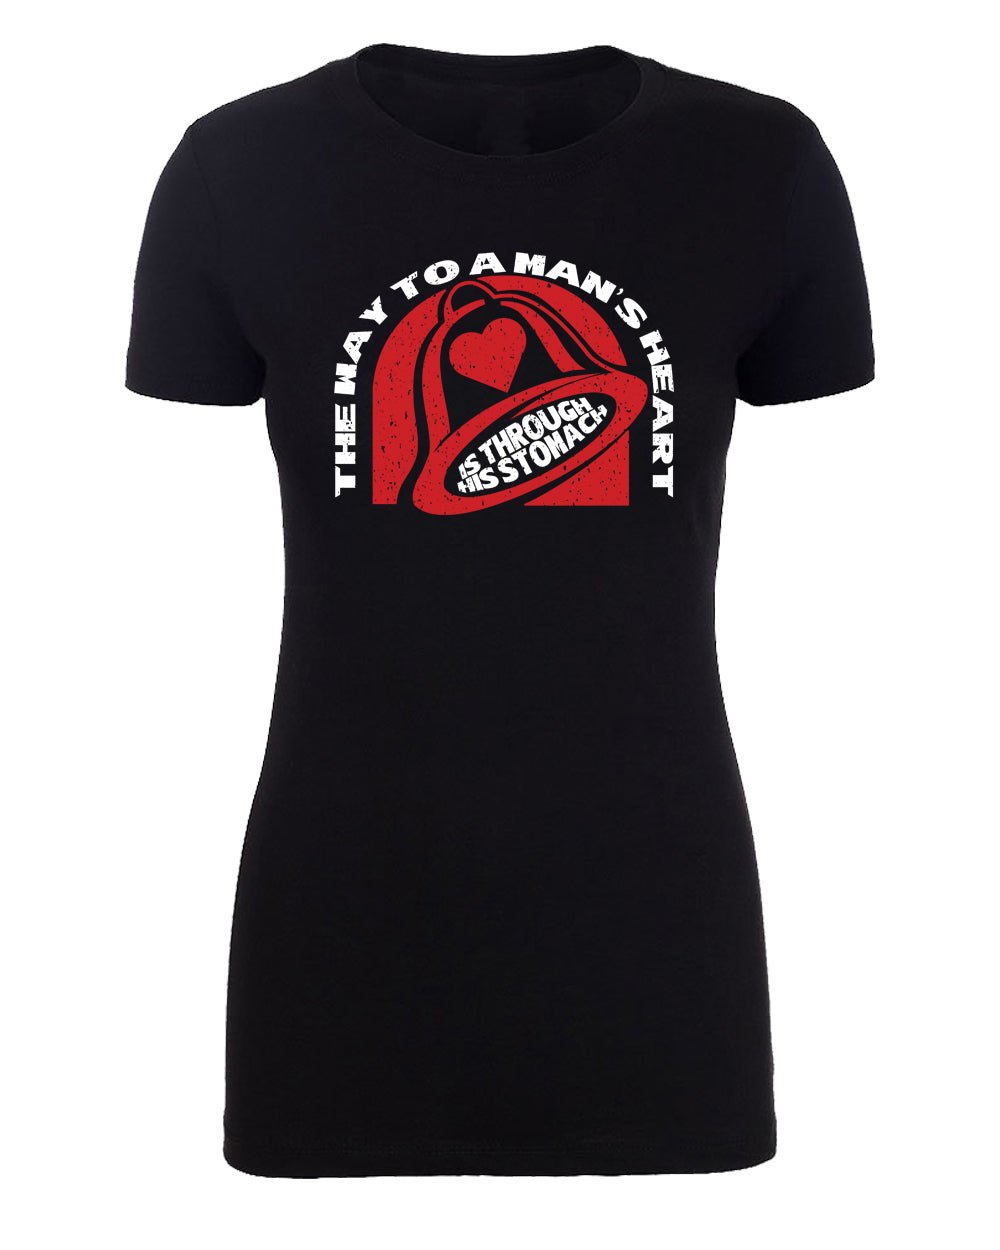 The Way to a Man's Heart Is Through His Stomach (Tacos) Womens T Shirts - Mato & Hash